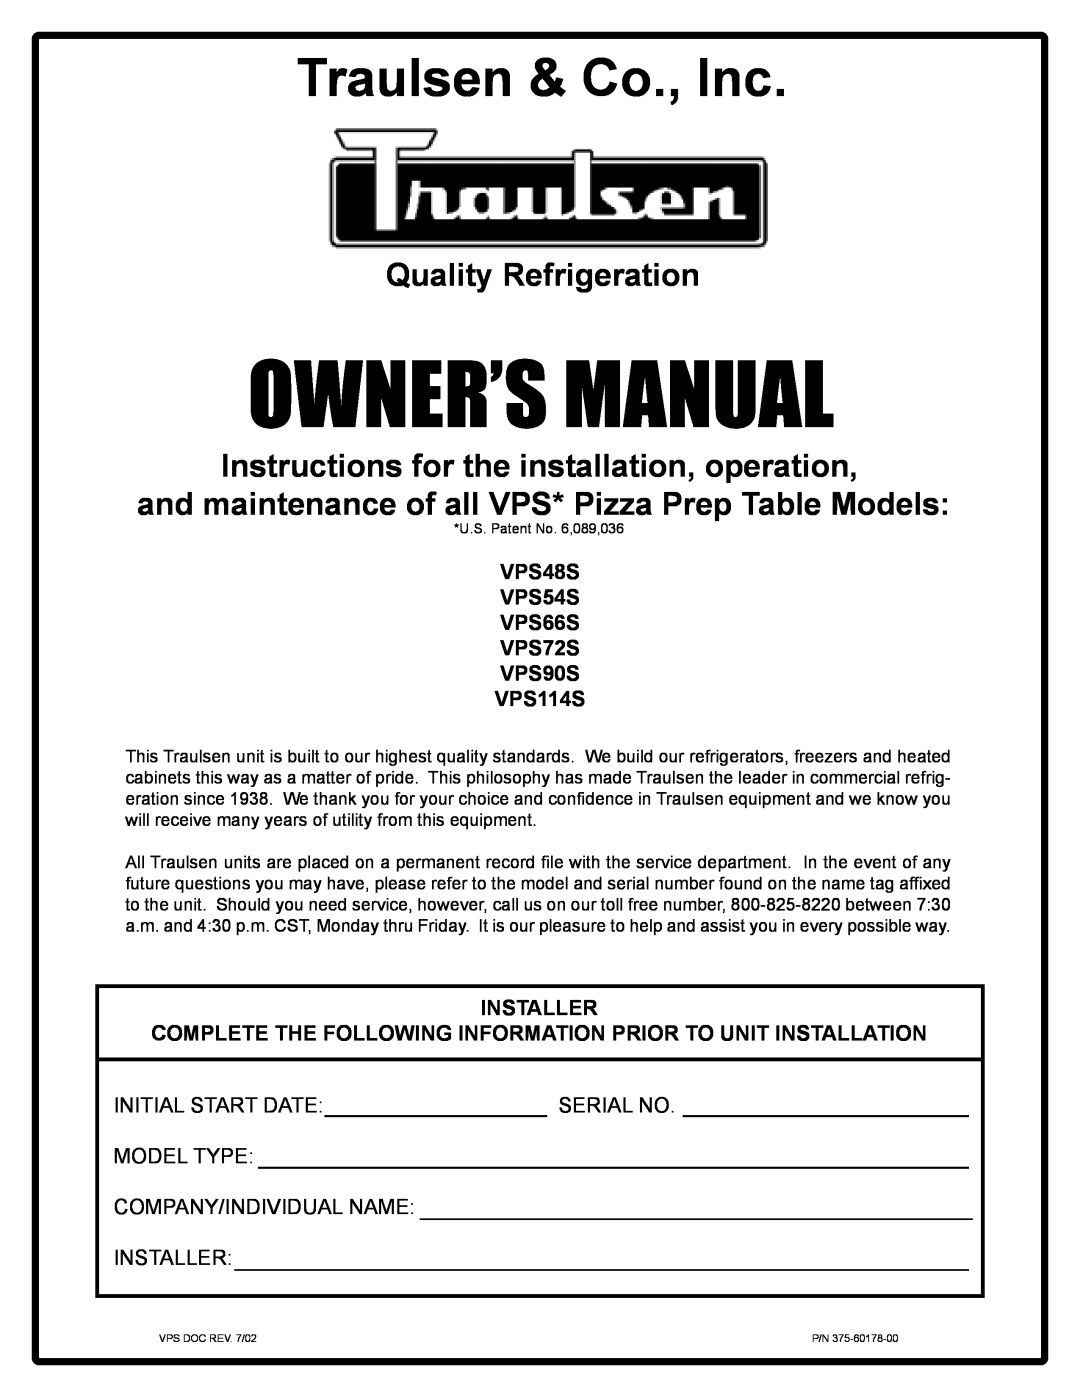 Traulsen VPS90S, VPS72S, VPS66S owner manual Quality Refrigeration, Initial Start Date, Serial No, Traulsen & Co., Inc 